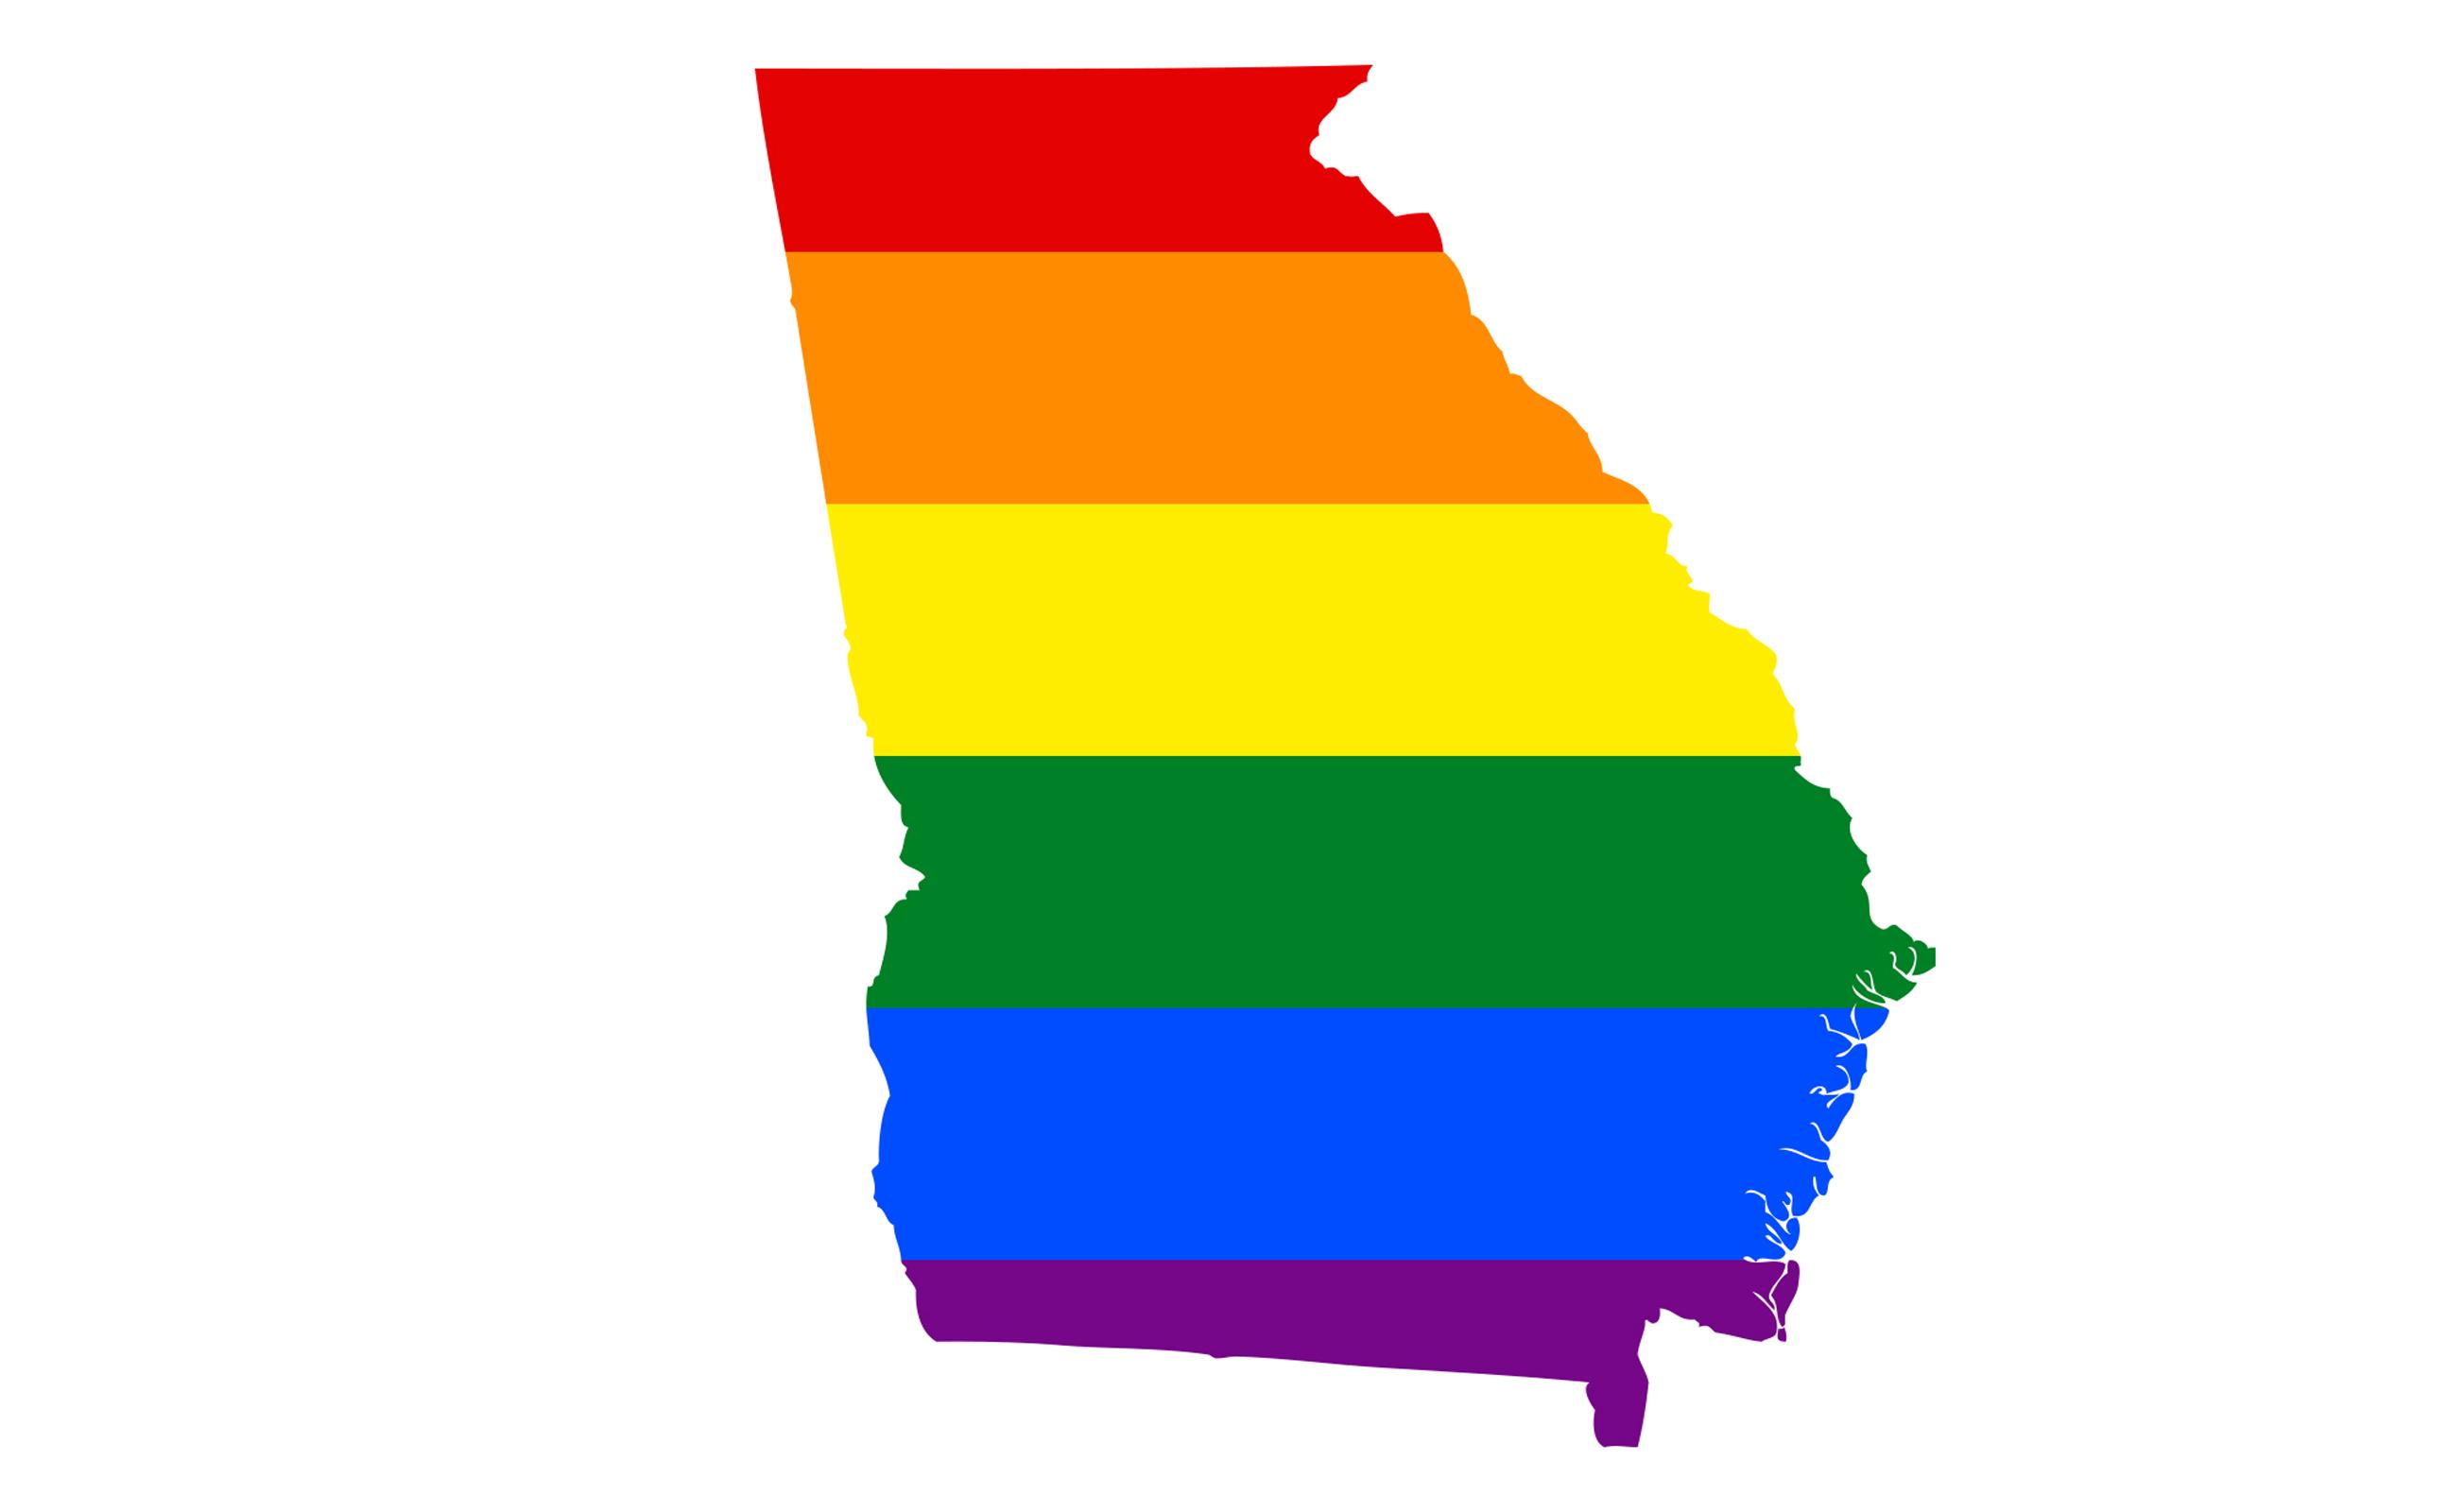 State of Georgia depicted in rainbow colors